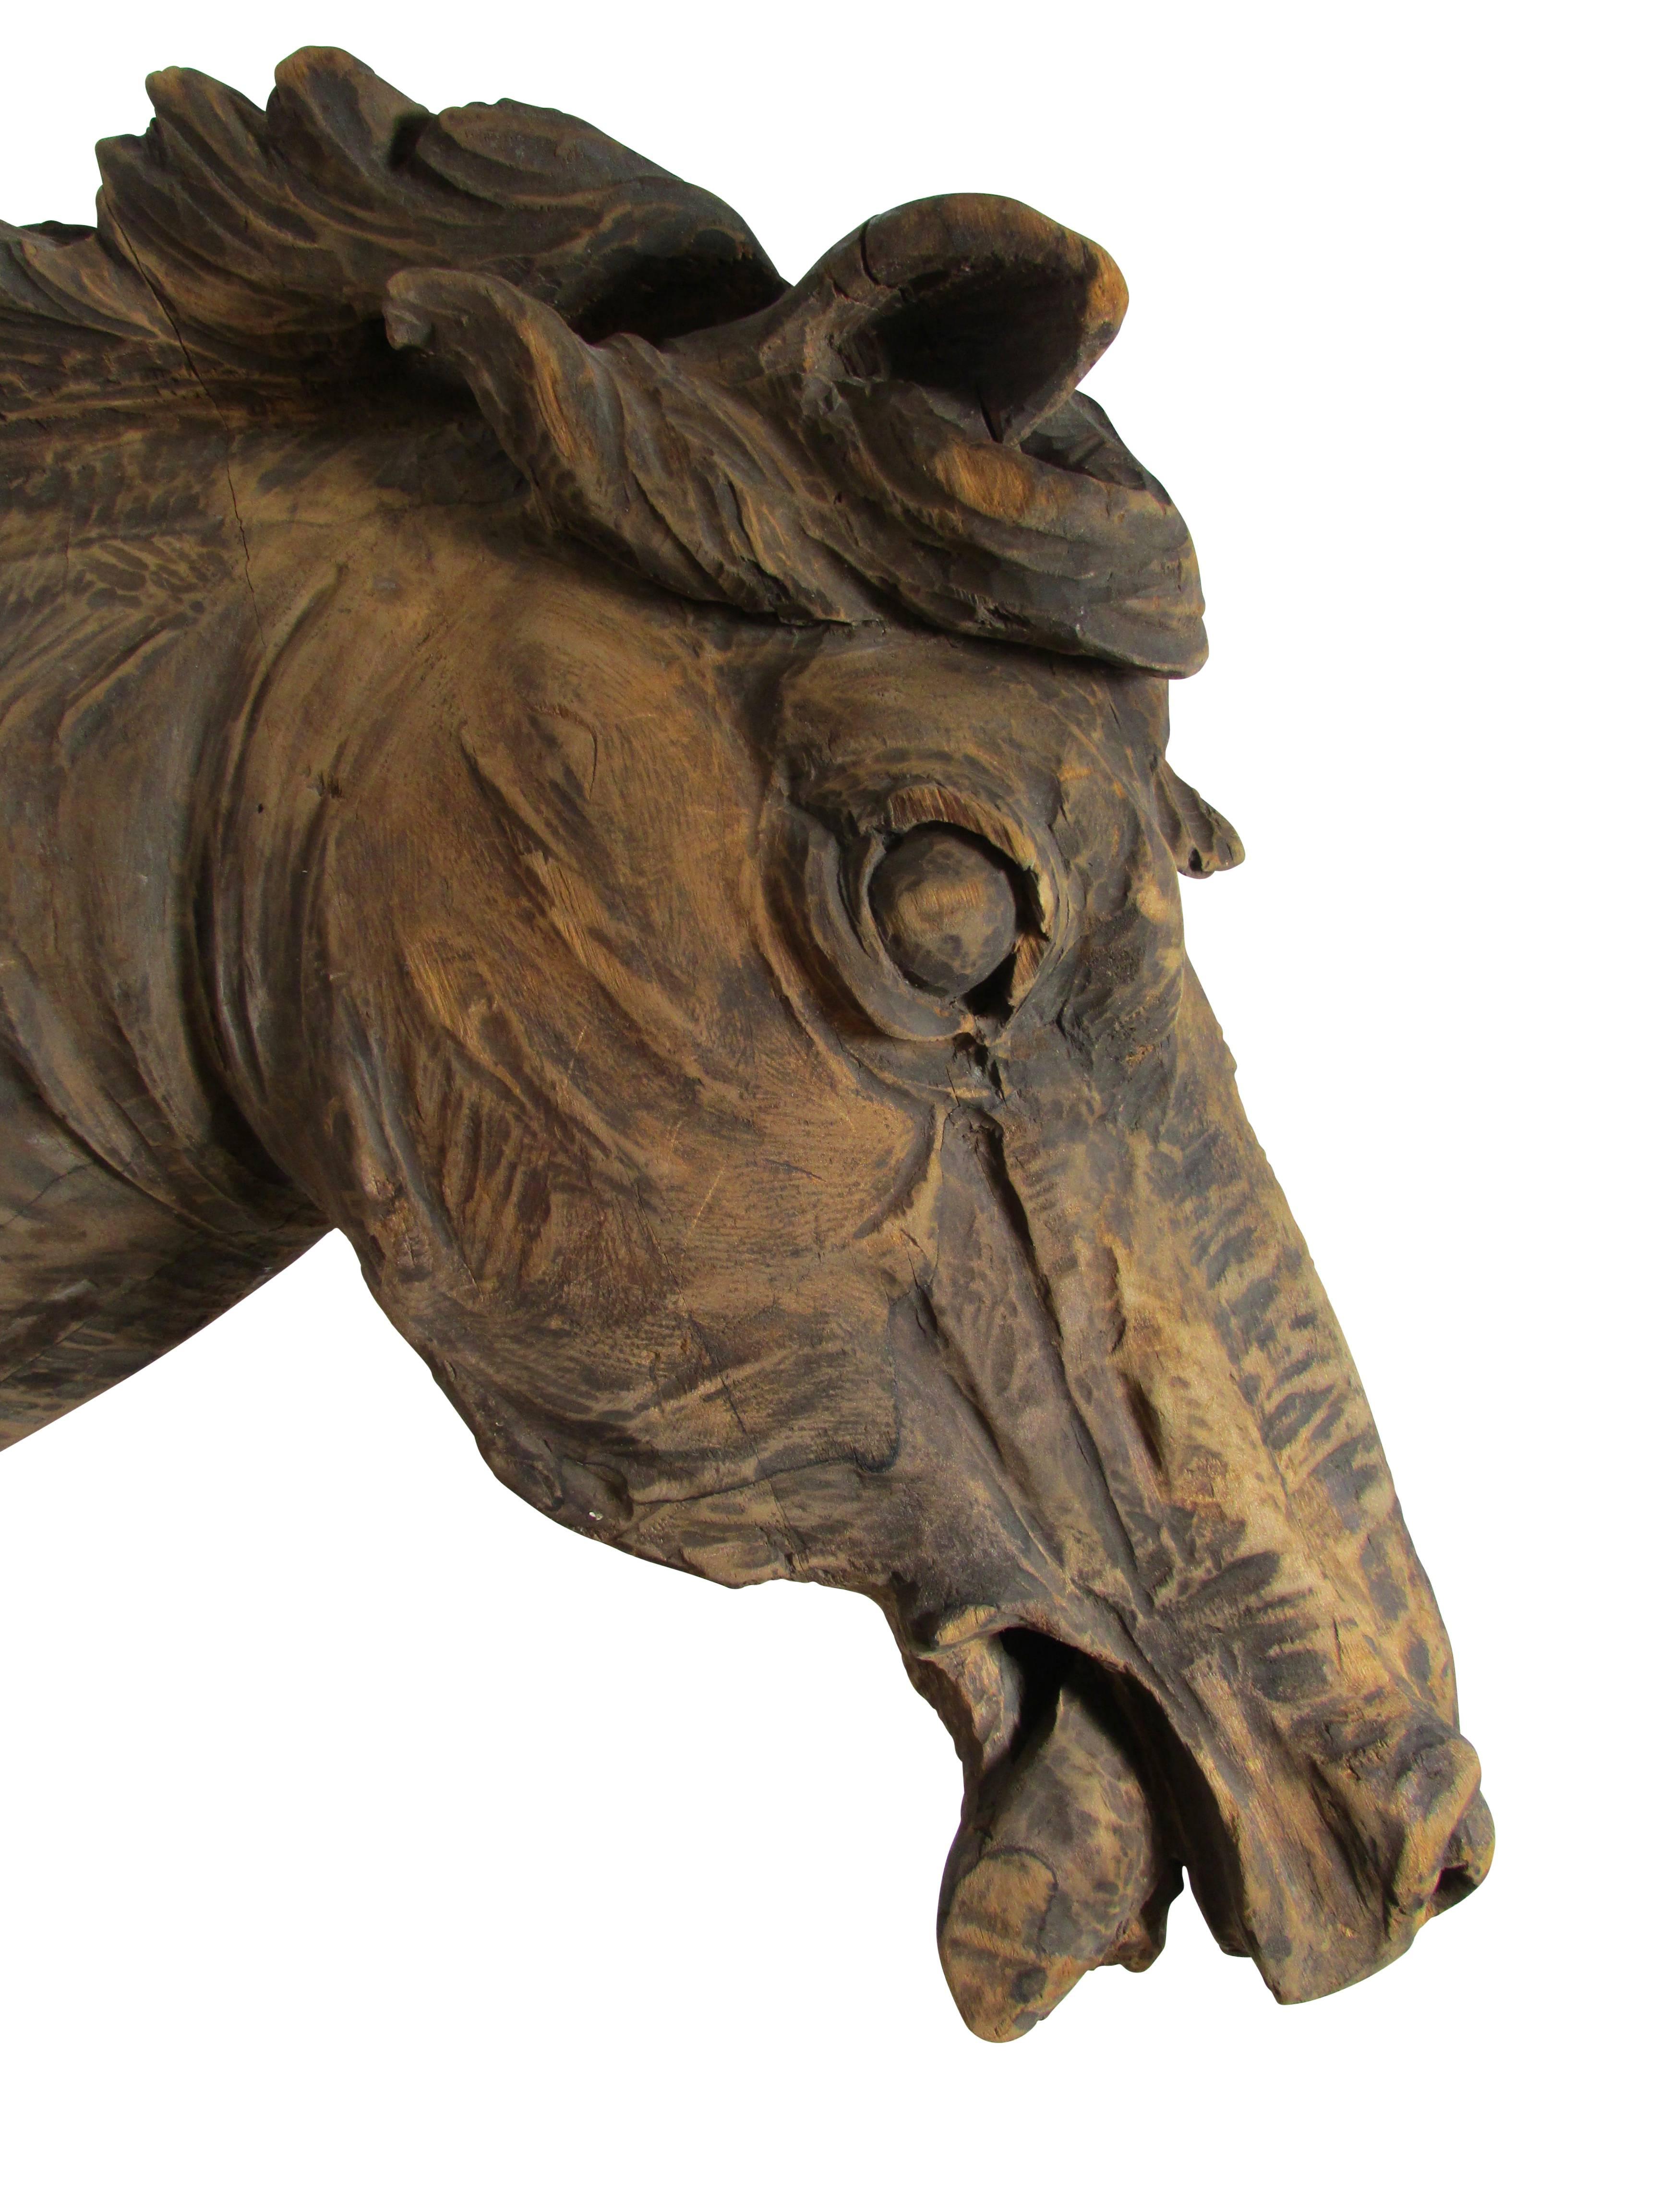 This is a fantastic one of a kind hand-carved horse head that was once mounted on the side of a barn.